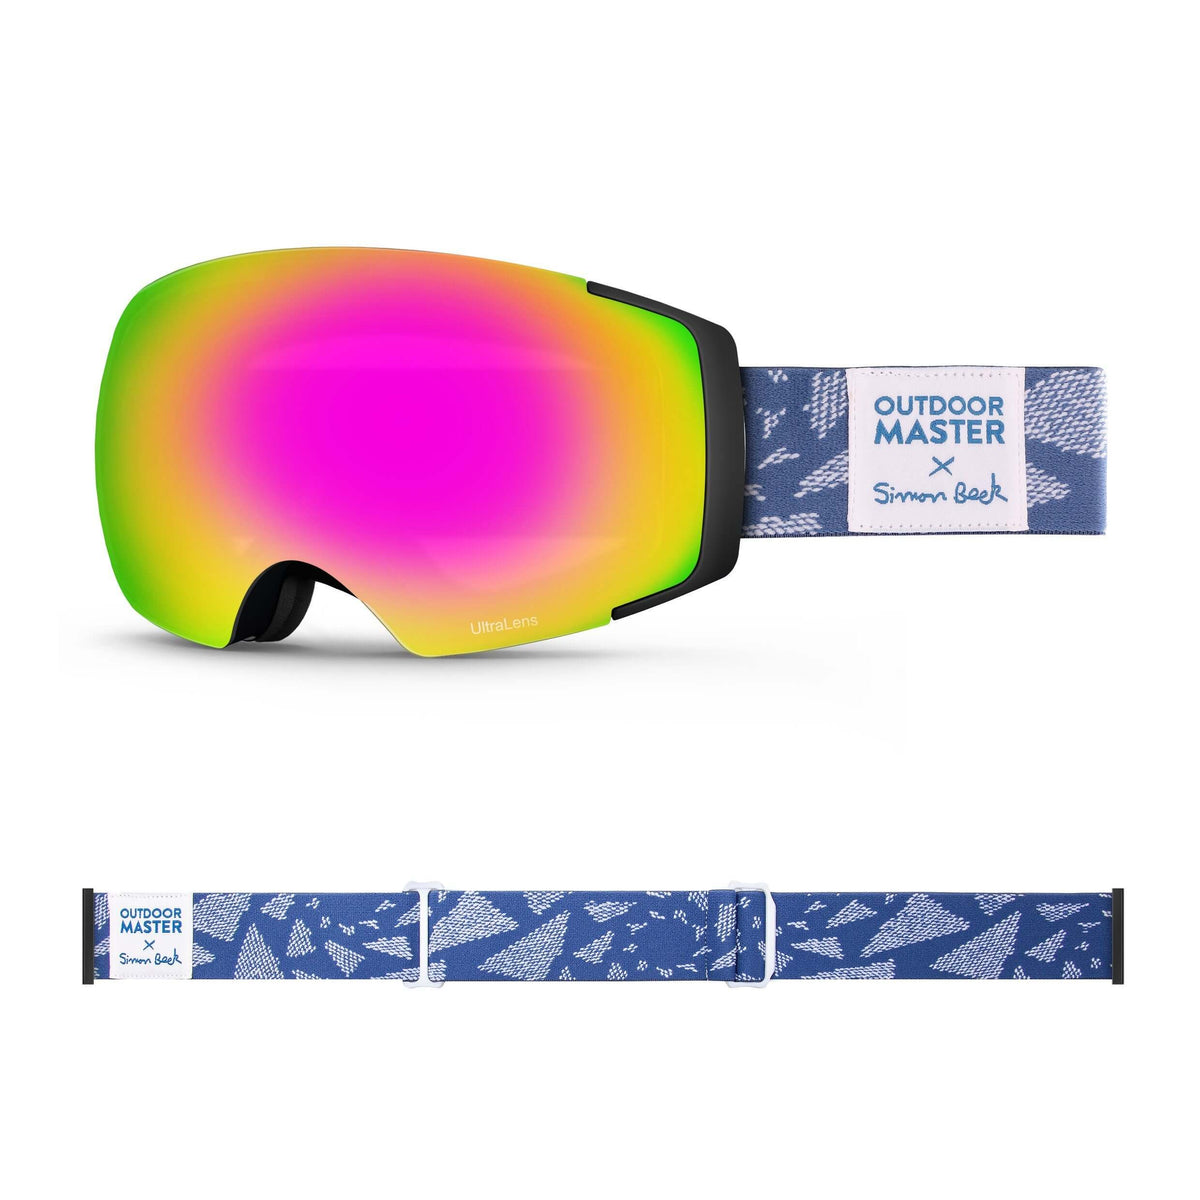 OutdoorMaster x Simon Beck Ski Goggles Pro Series - Snowshoeing Art Limited Edition OutdoorMaster UltraLens VLT 22% Optimized Orange with REVO Pink Flying Triangles